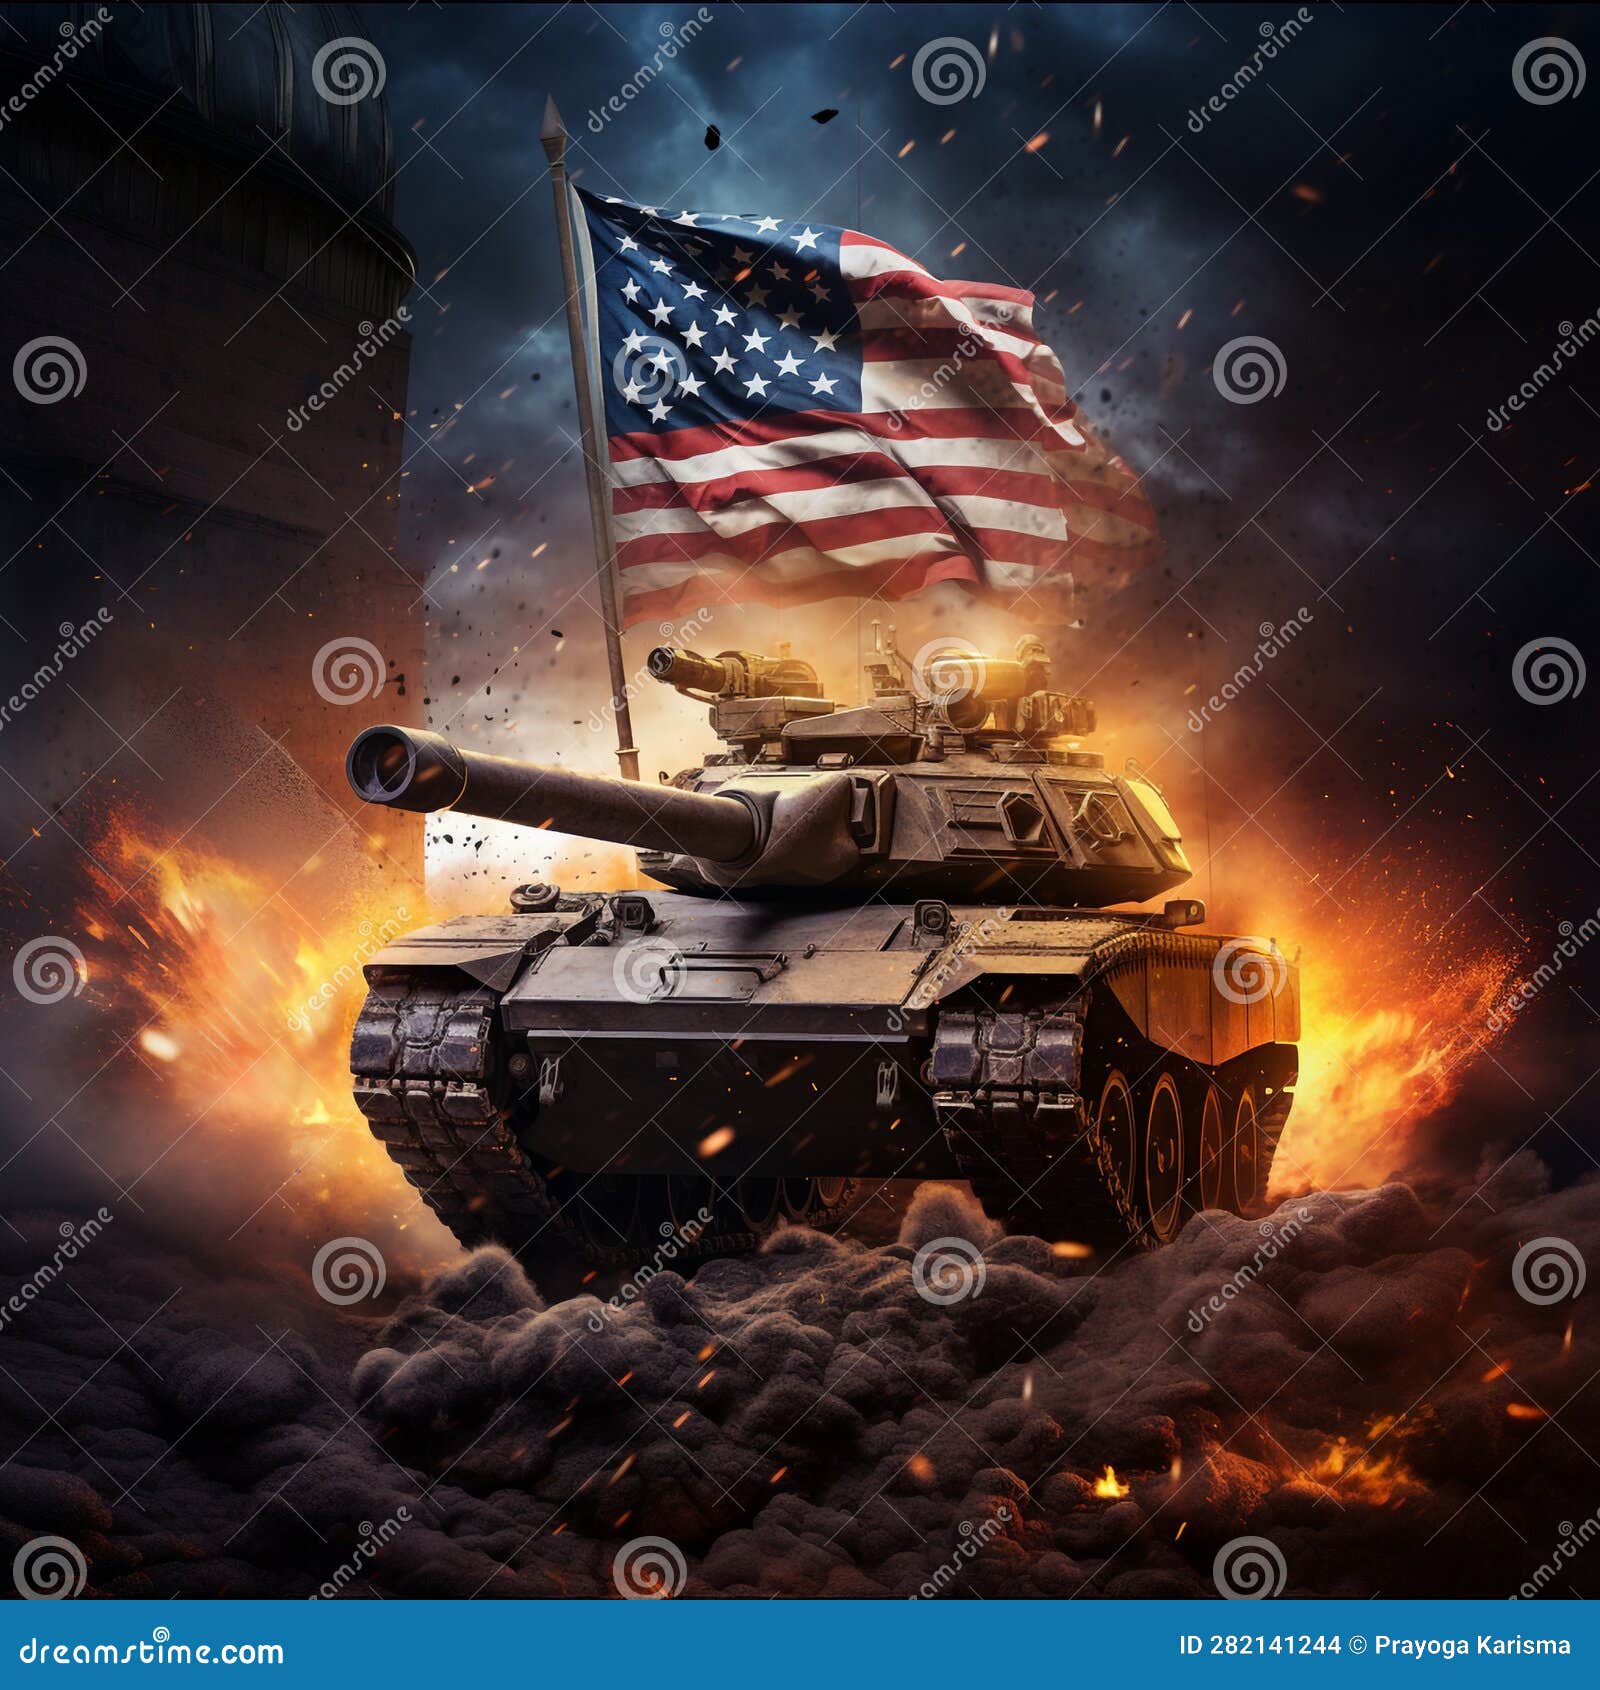 American tank with the flag as background during independence day,  generated by artificial intelligence 26227269 Stock Photo at Vecteezy